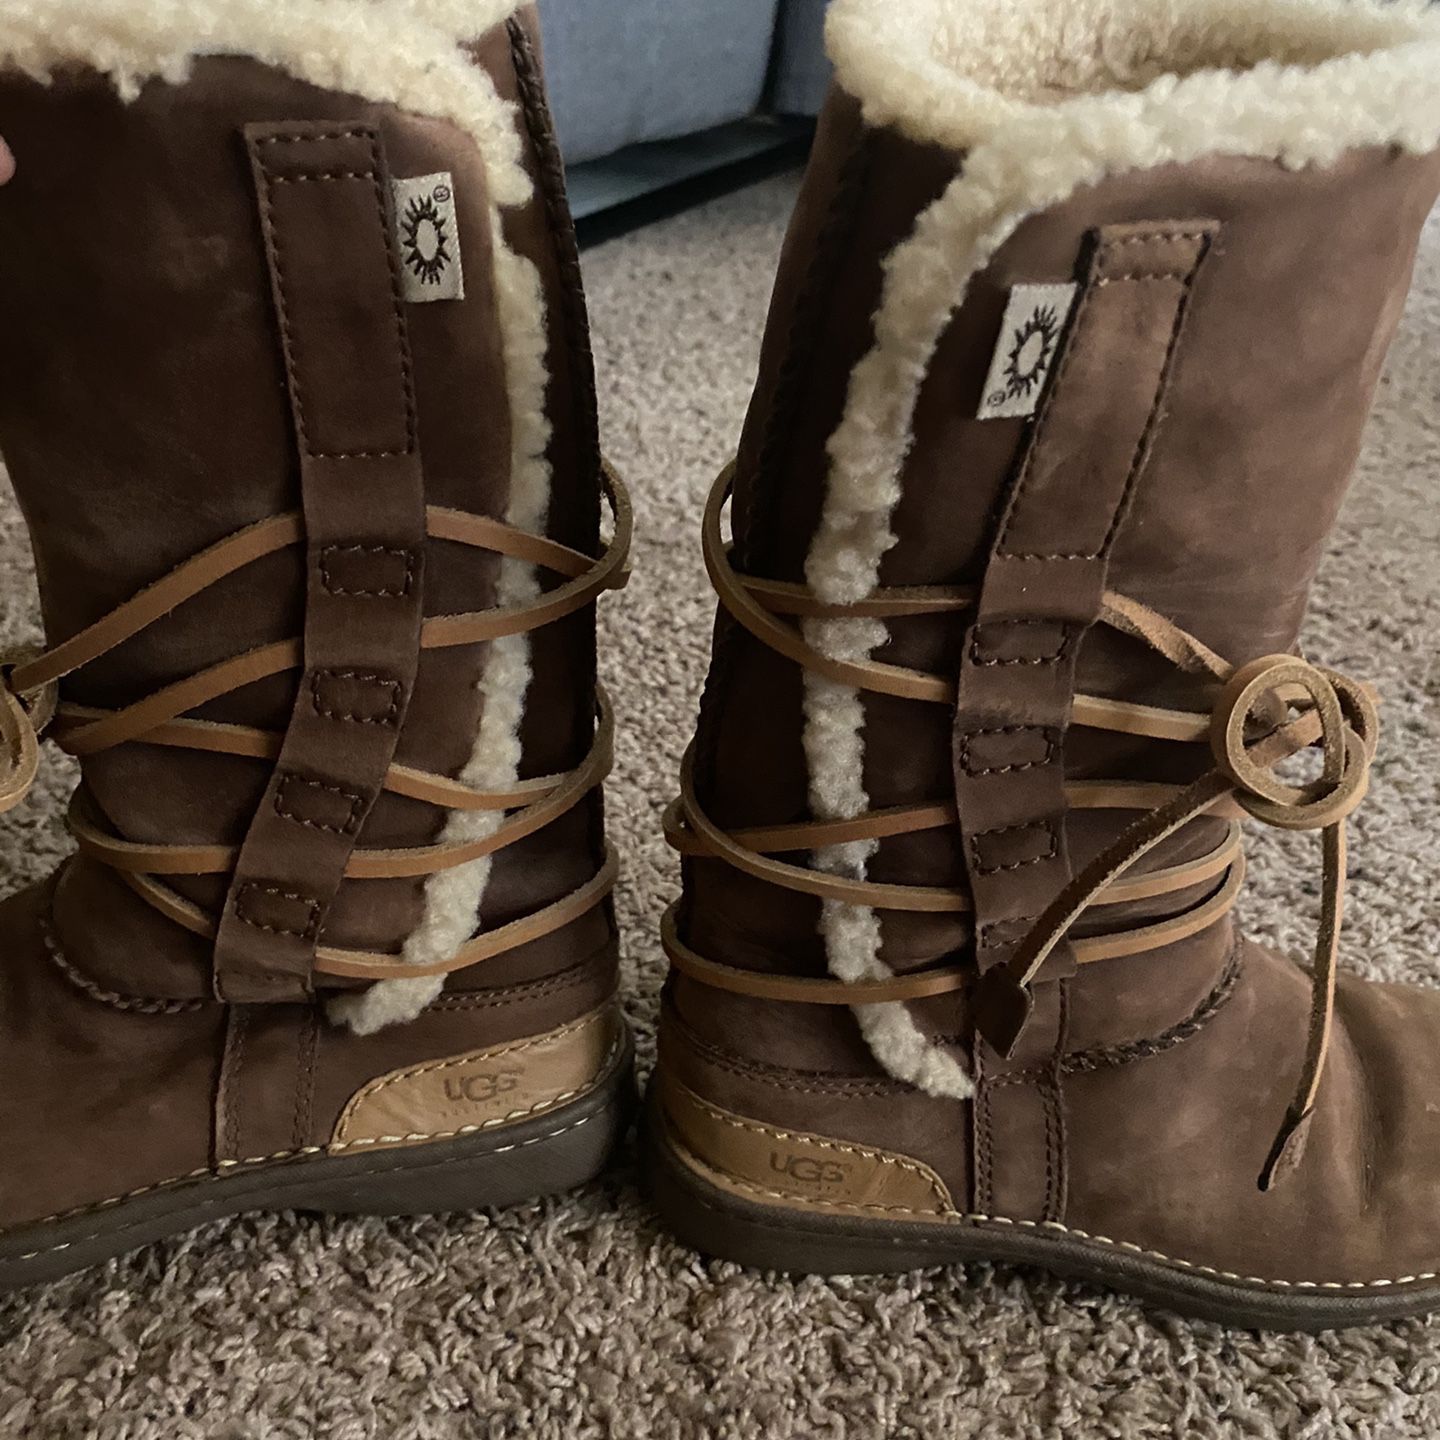 Ugg’s Boots